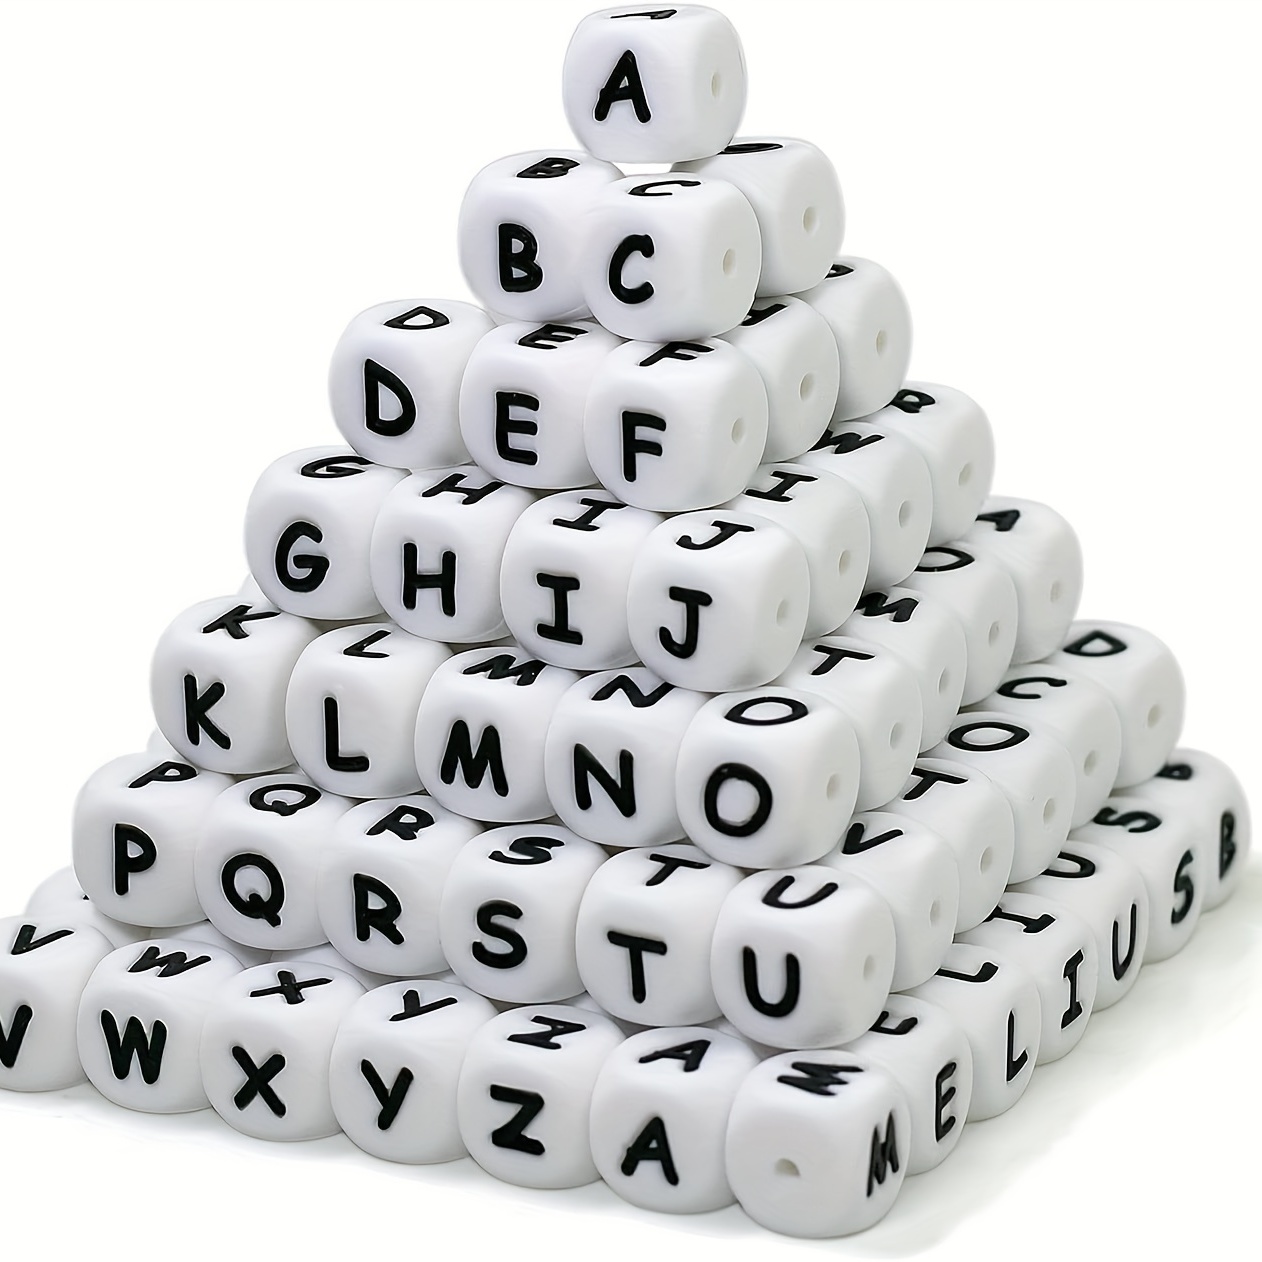  Silicone Letter Beads, 15pcs 12mm Cube Alphabet